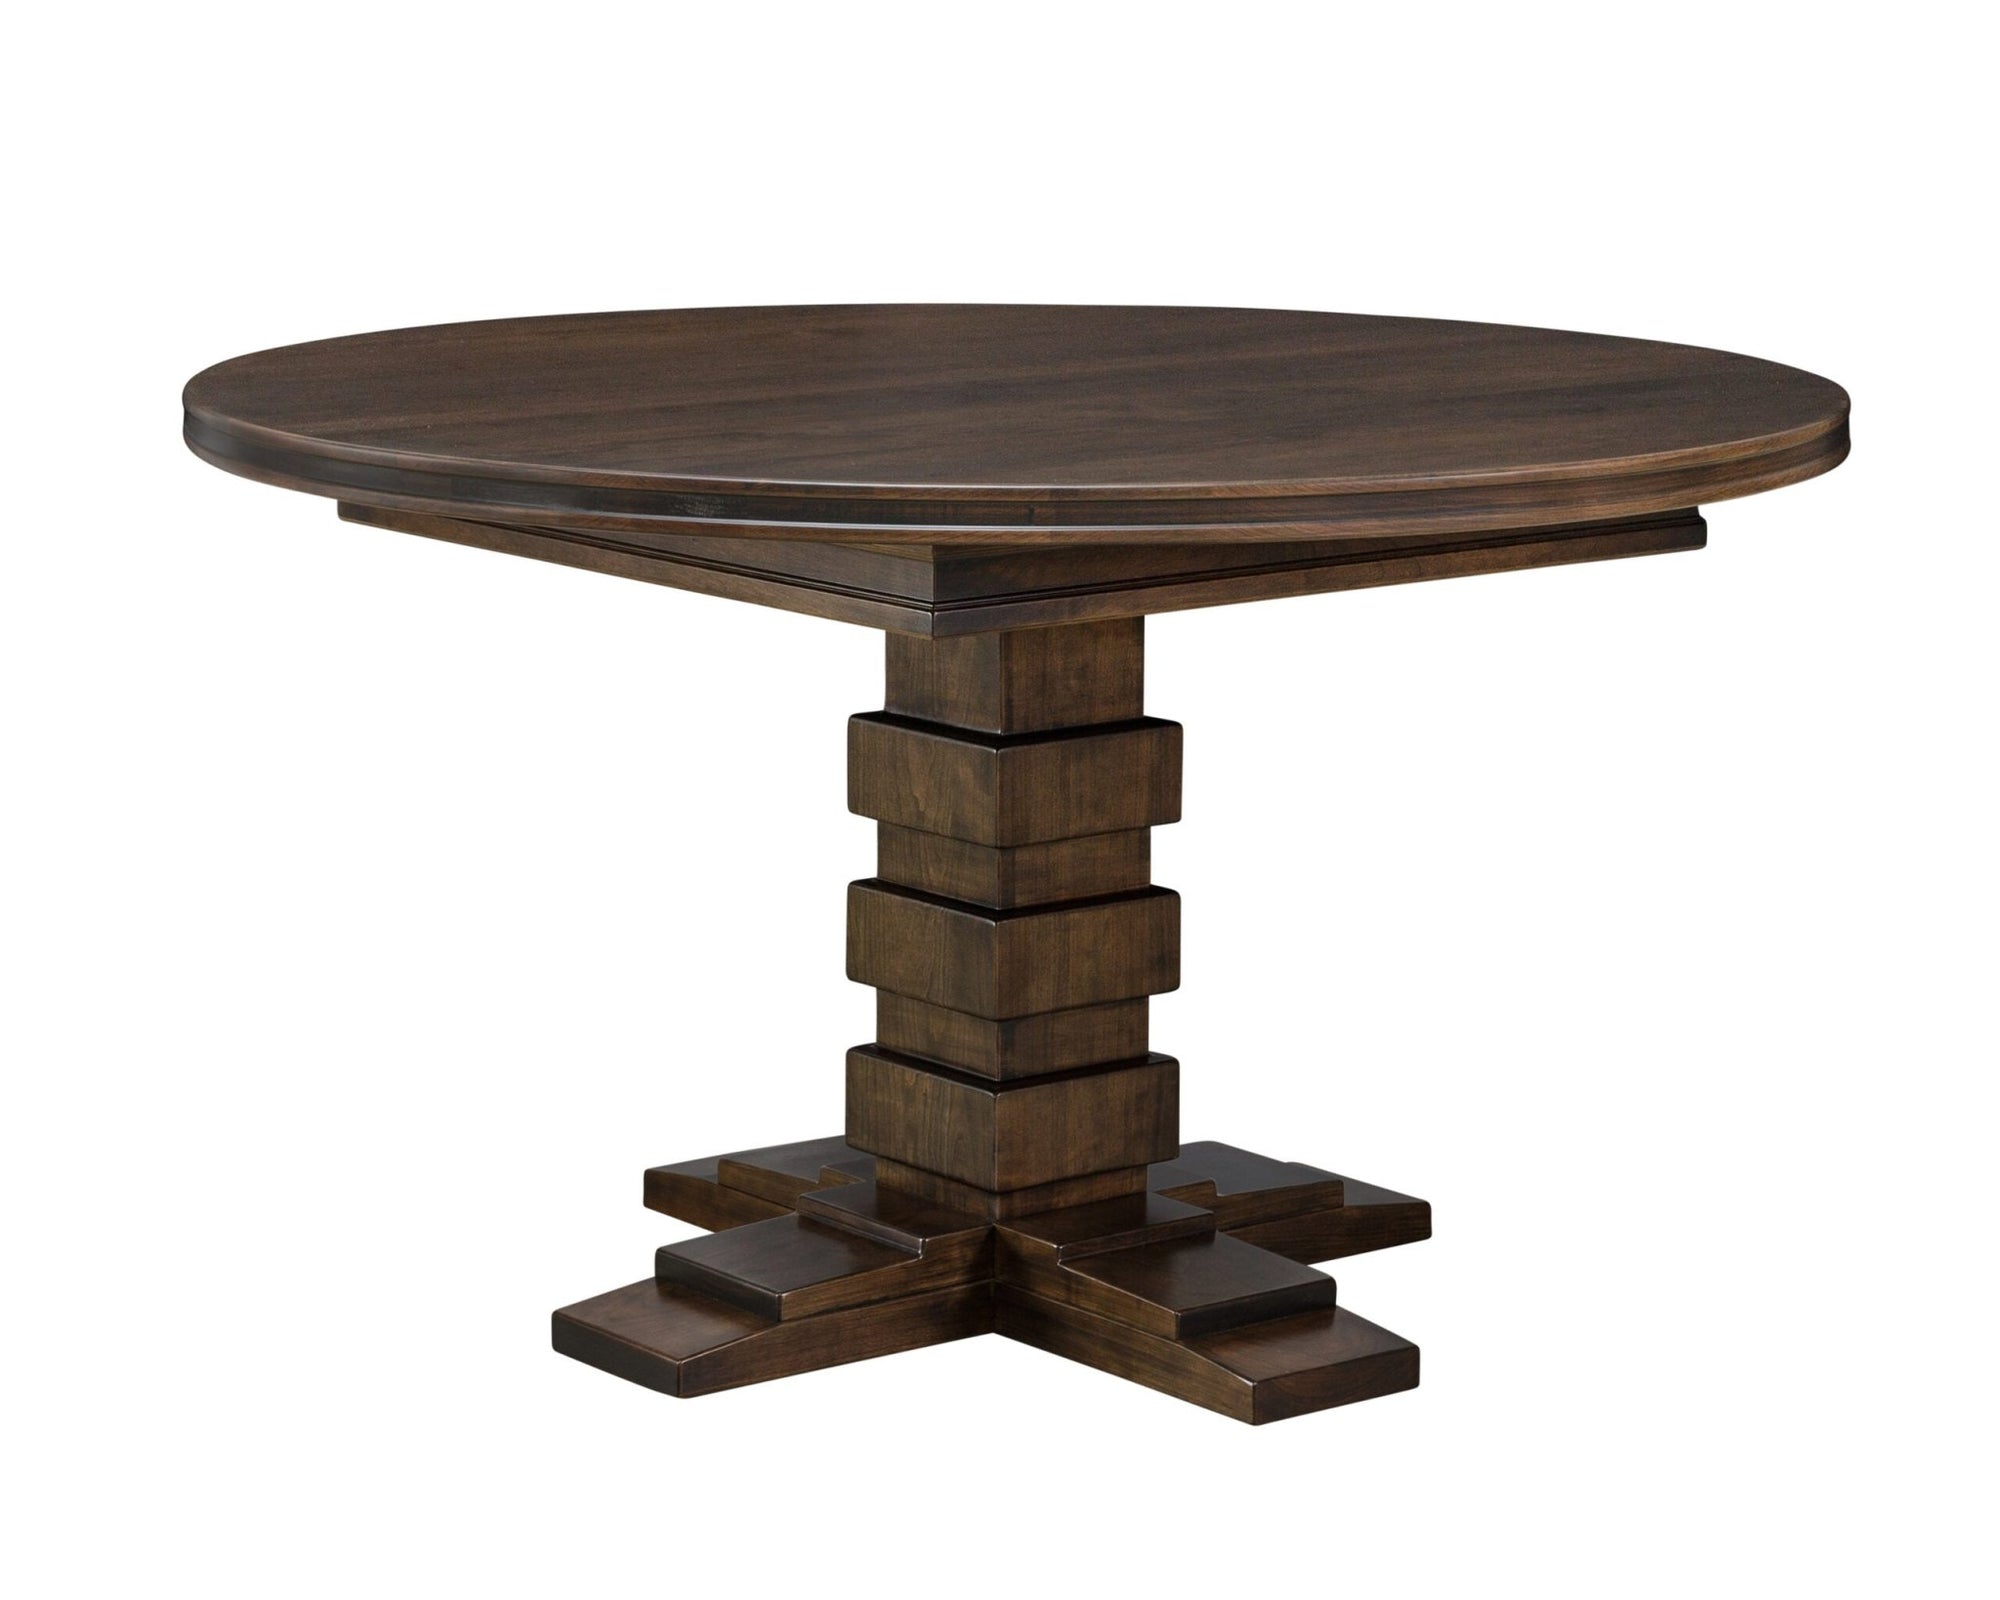 Mackinac Table - snyders.furniture